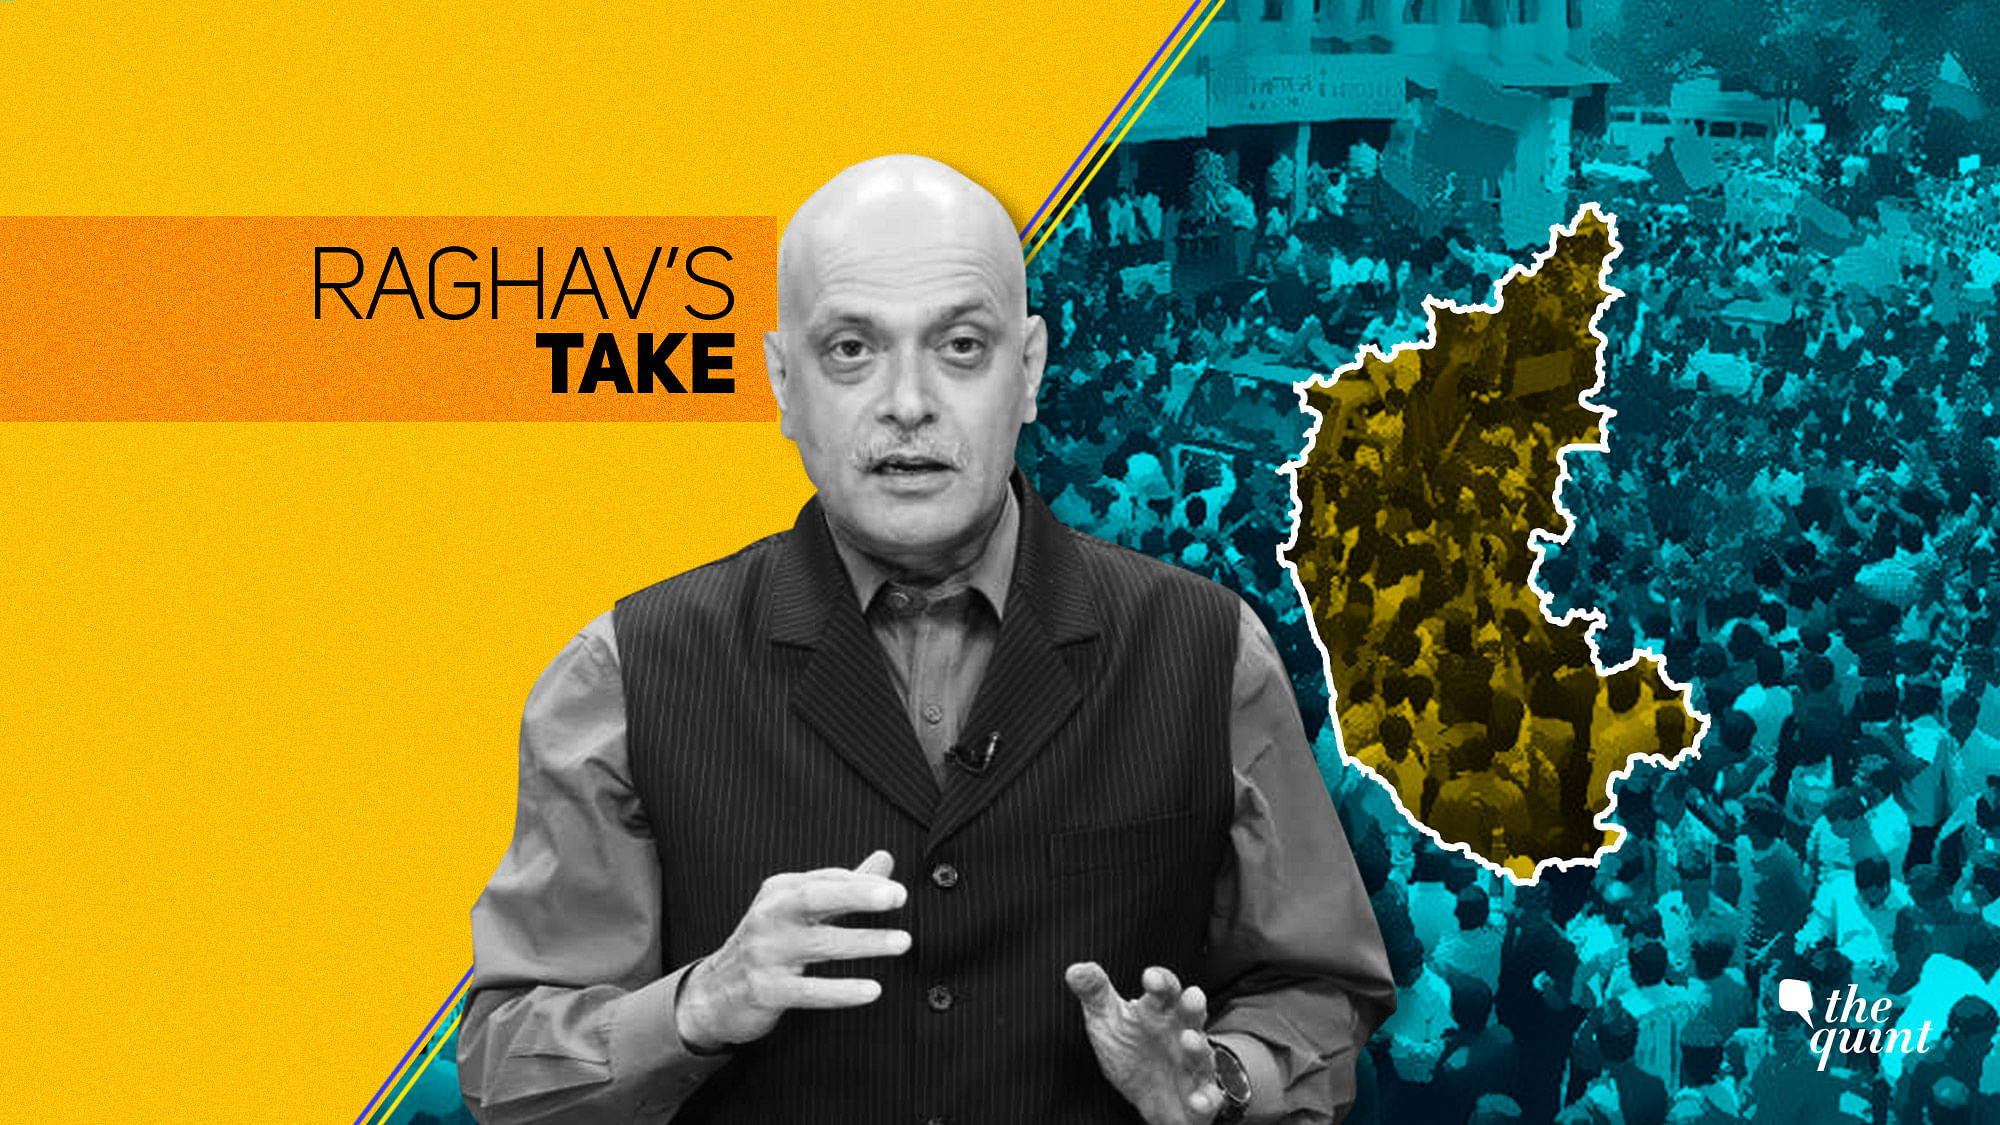 If the Karnataka elections are the yardstick, then, 2019 is an open game, writes Quint’s Editor-in-chief Raghav Bahl.